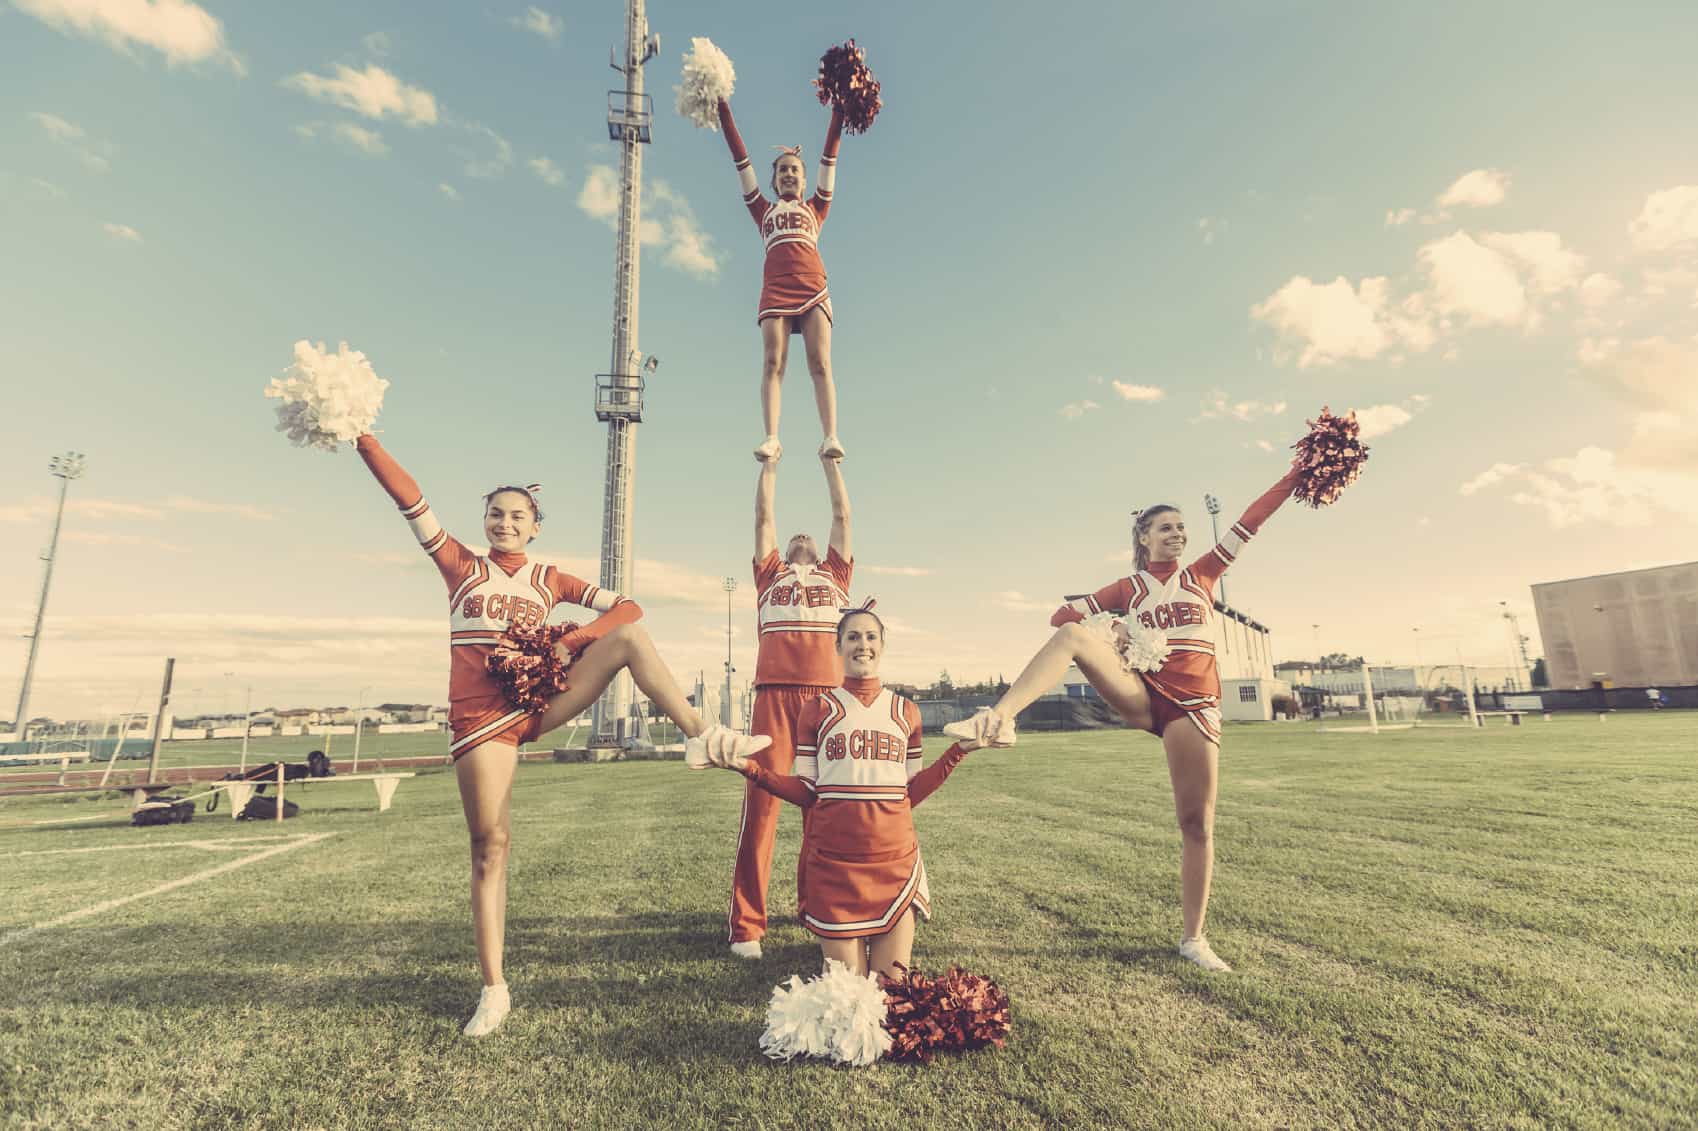 Cheerleaders with red clothing and the sky as background, image for page called more happiness that includes information about life crises, recovery support, psychology podcast, addiction, emotions, well-being, happiness and wellness